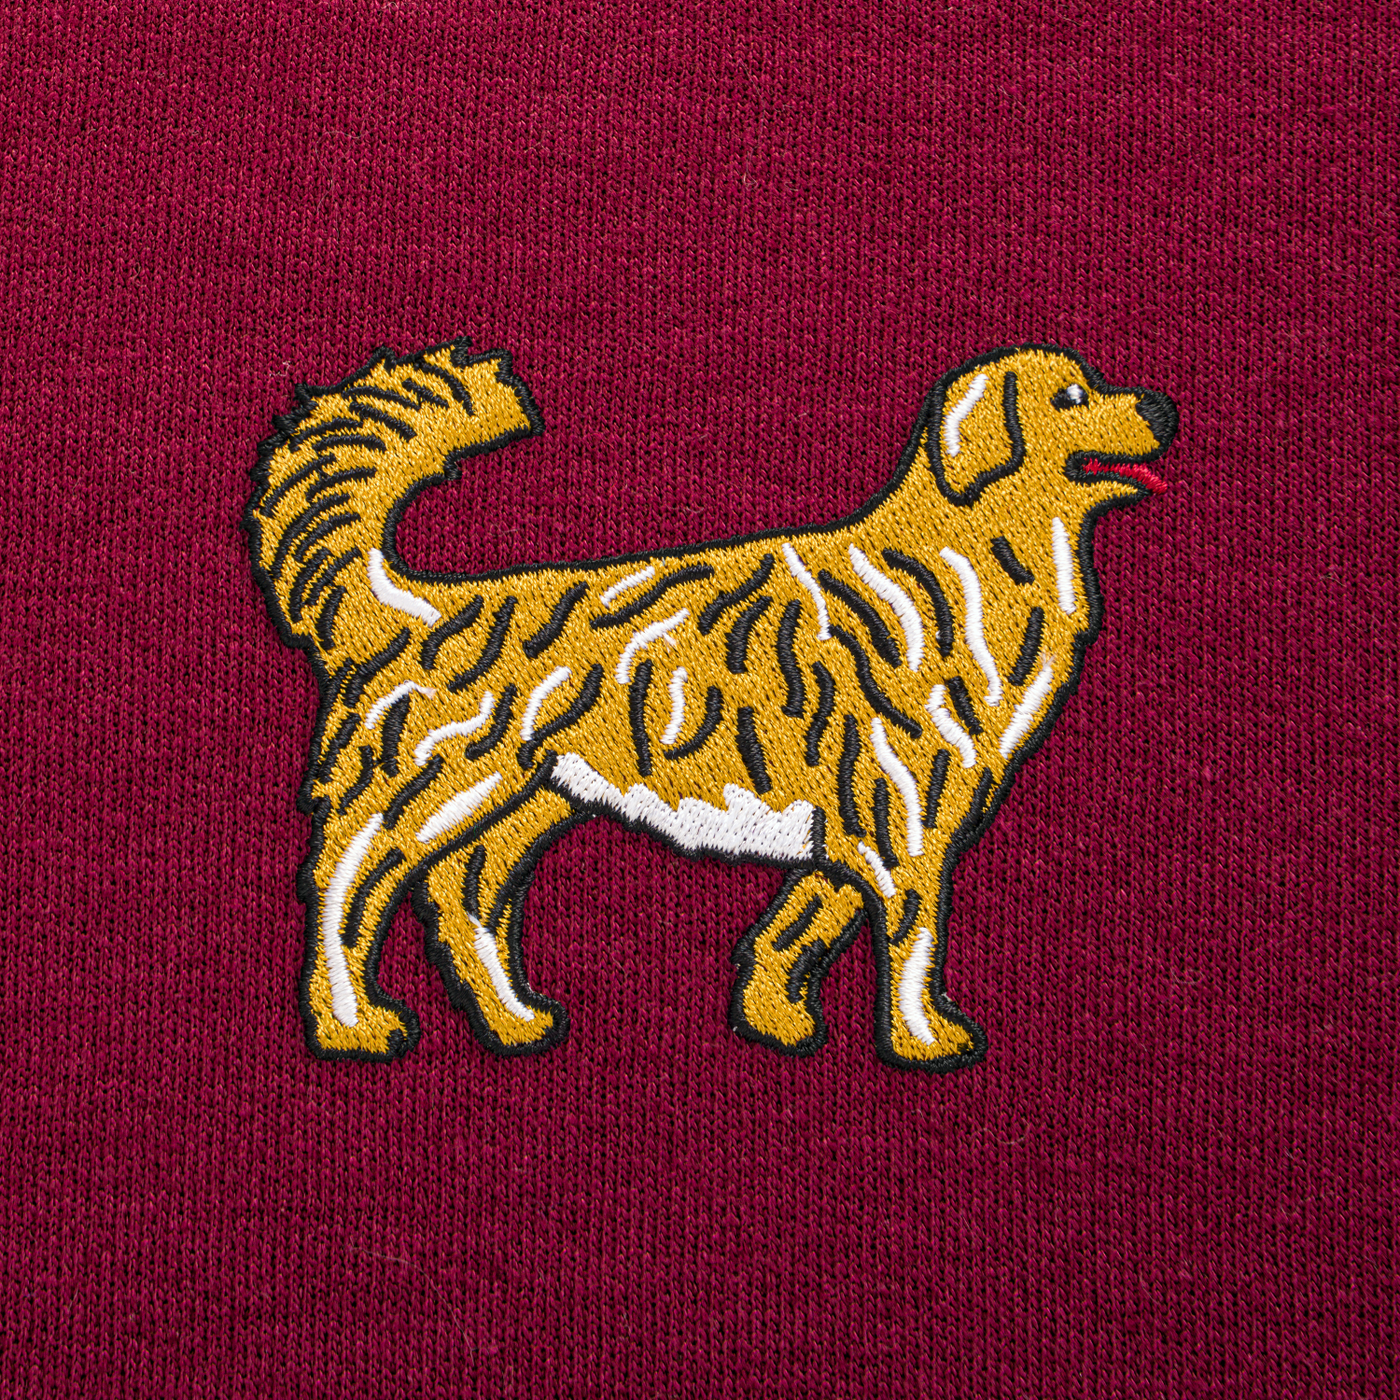 Bobby's Planet Men's Embroidered Golden Retriever Sweatshirt from Paws Dog Cat Animals Collection in Maroon Color#color_maroon